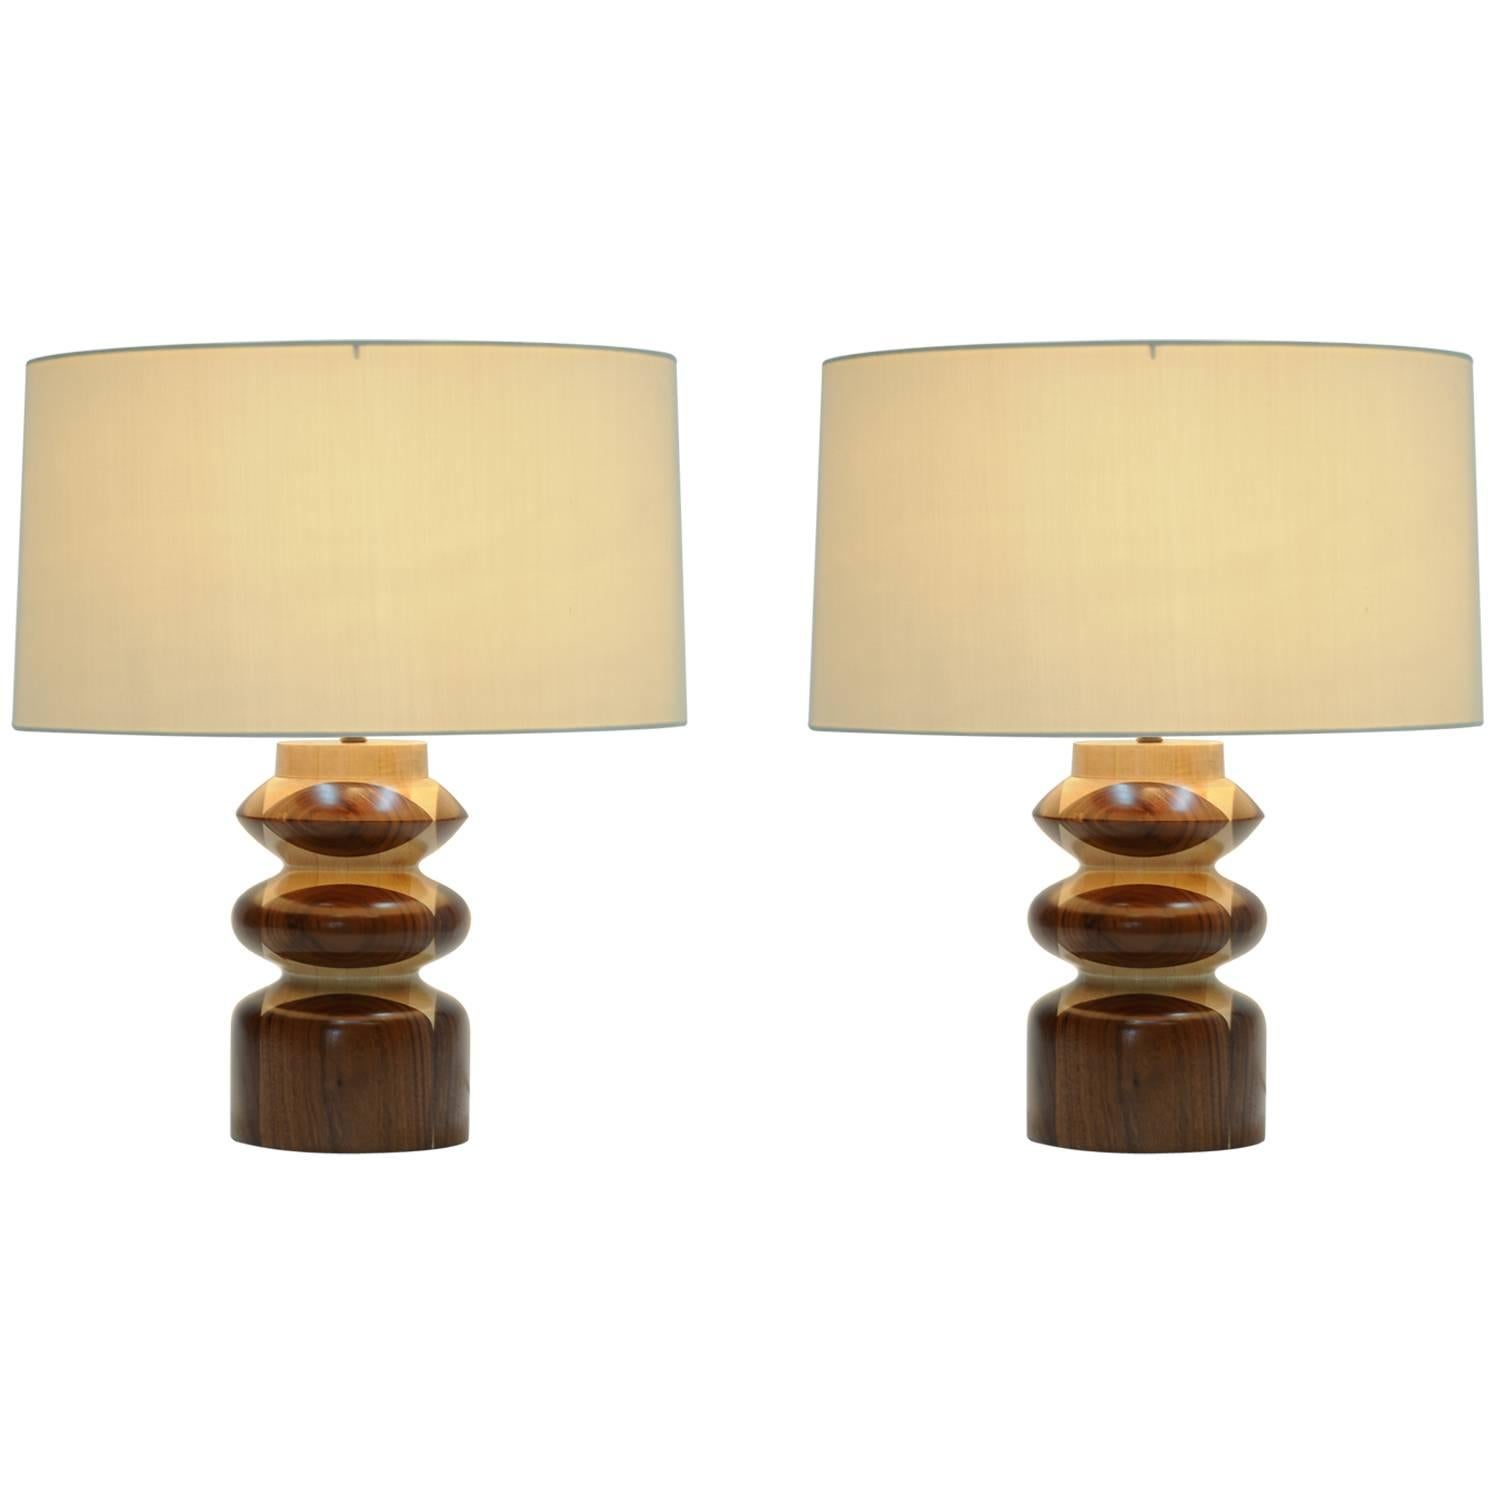 Pair of Lamps in the Manner of Raymond Lowey's Chess Pieces For Sale